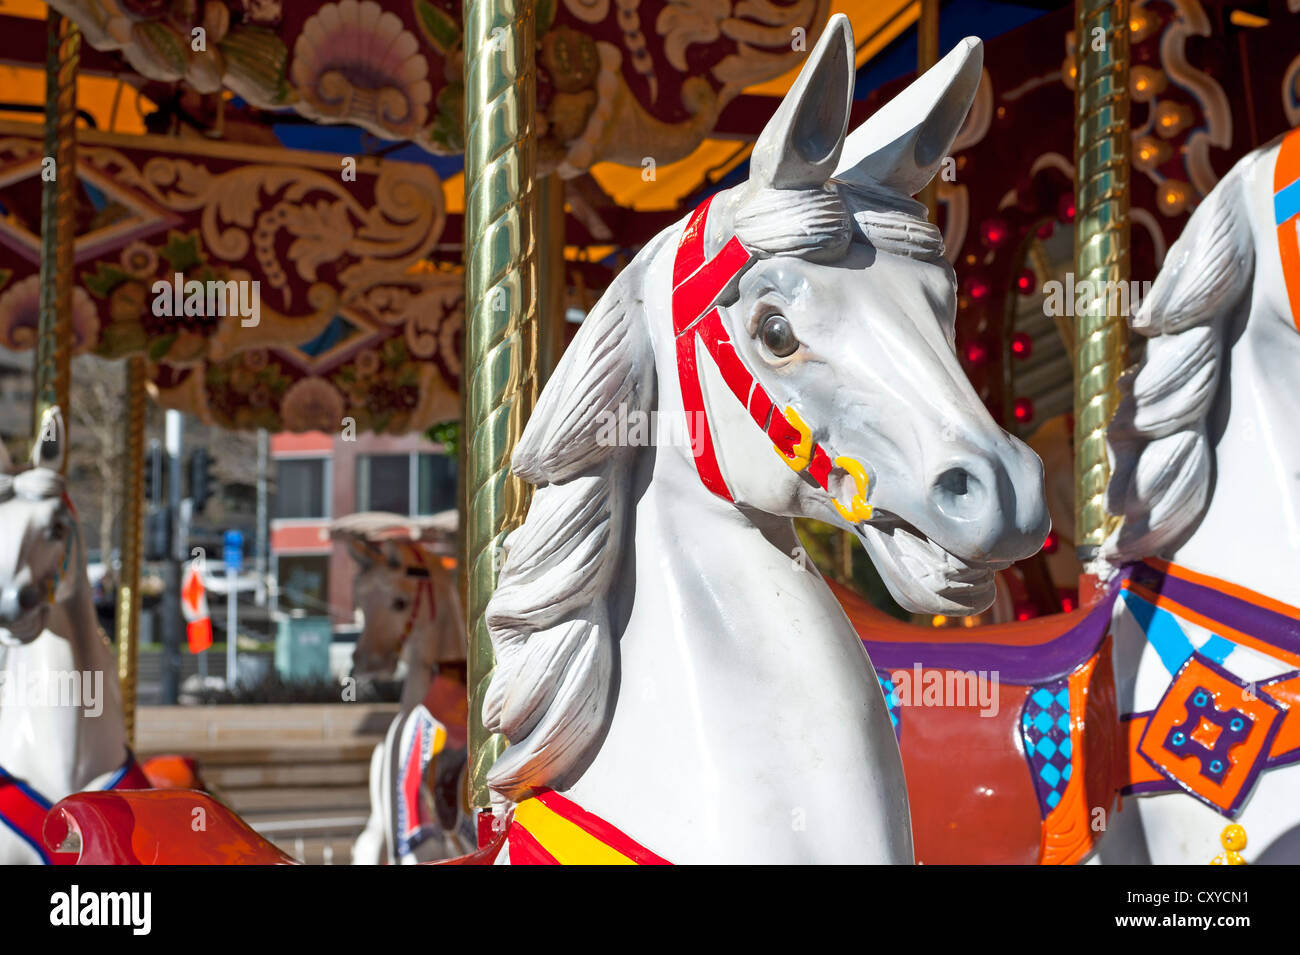 Old carousel with horses, detail view Stock Photo